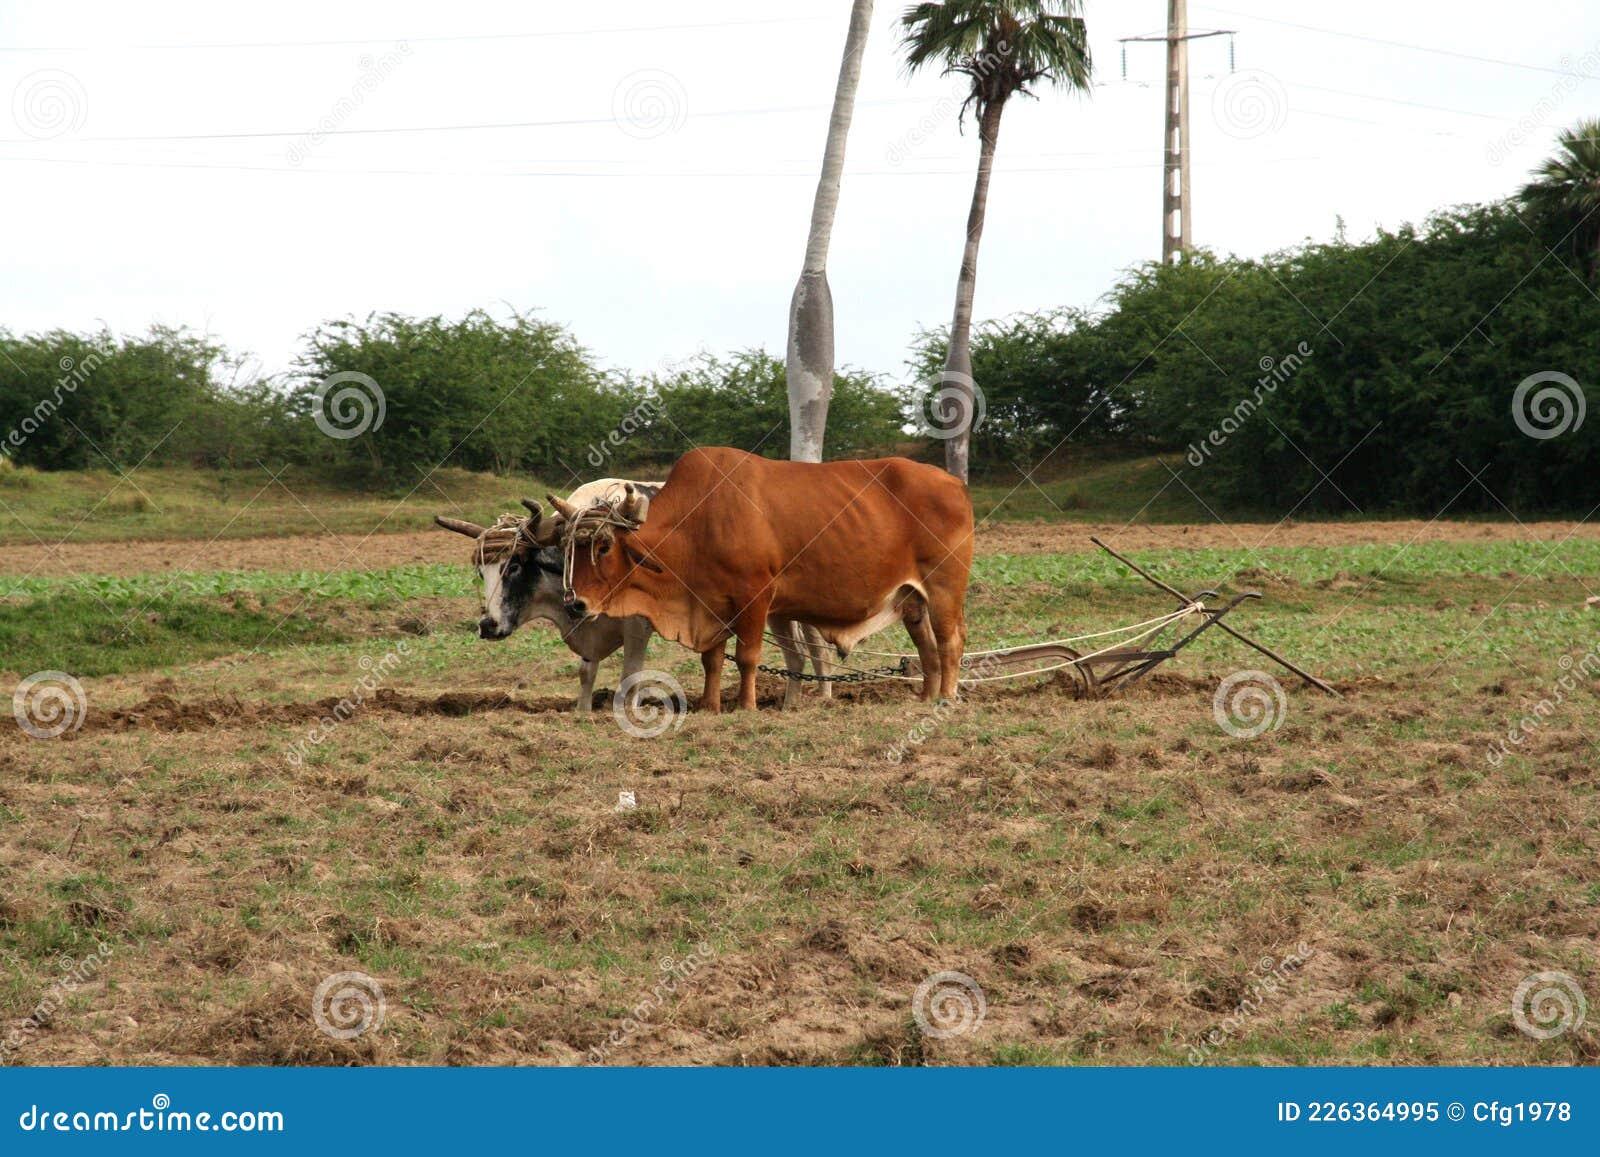 pair of zebus plowing the land in pinar del rÃÂ­o, cuba. cuban cattle. cuban agriculture and livestock. manual plow drawn by animal